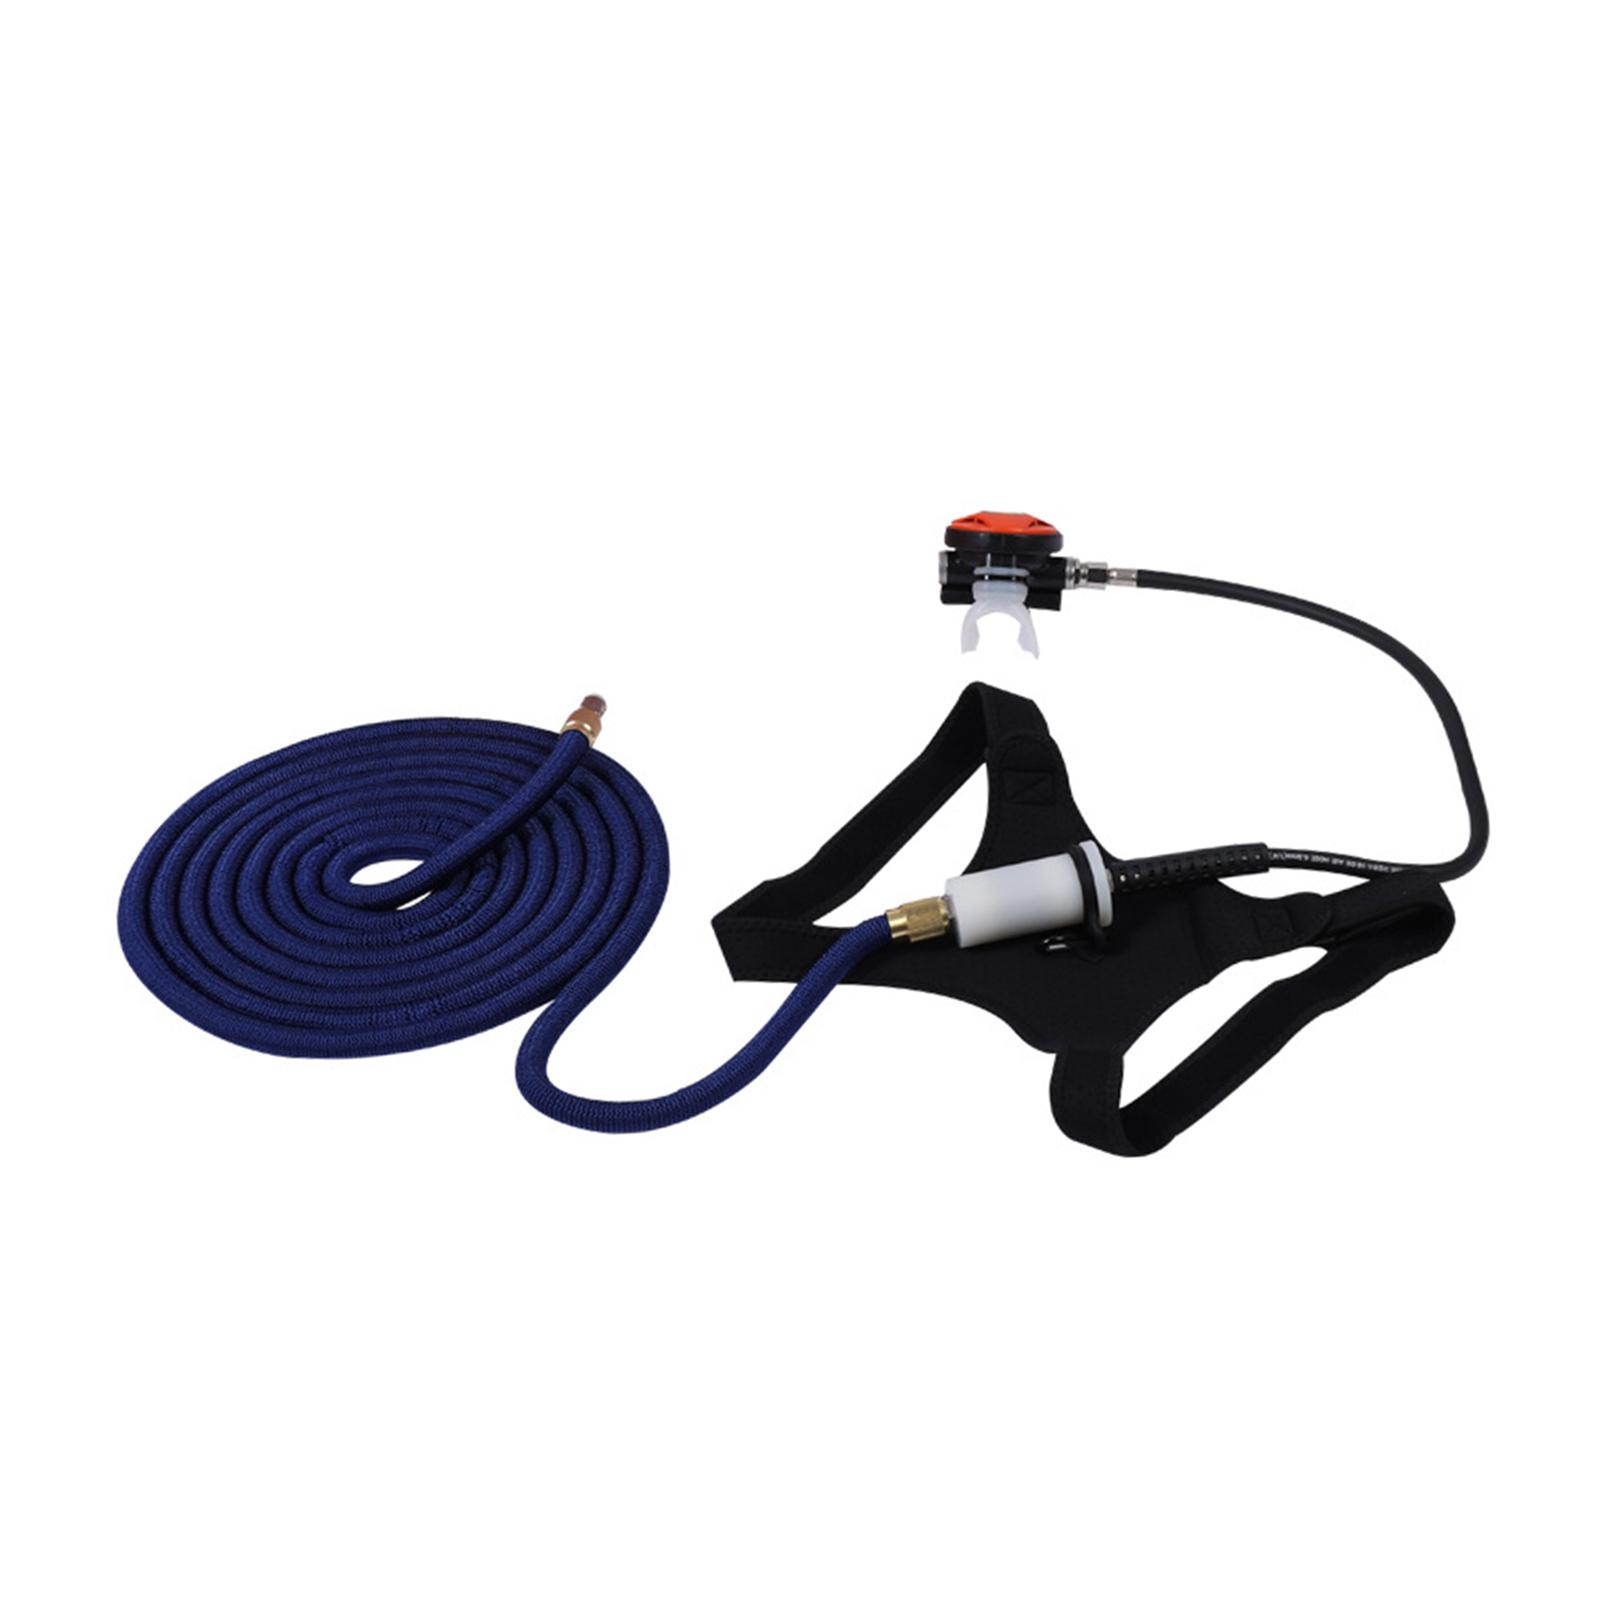 Submersible Medium Pressure Hose Practical Durable for Underwater Production Areas